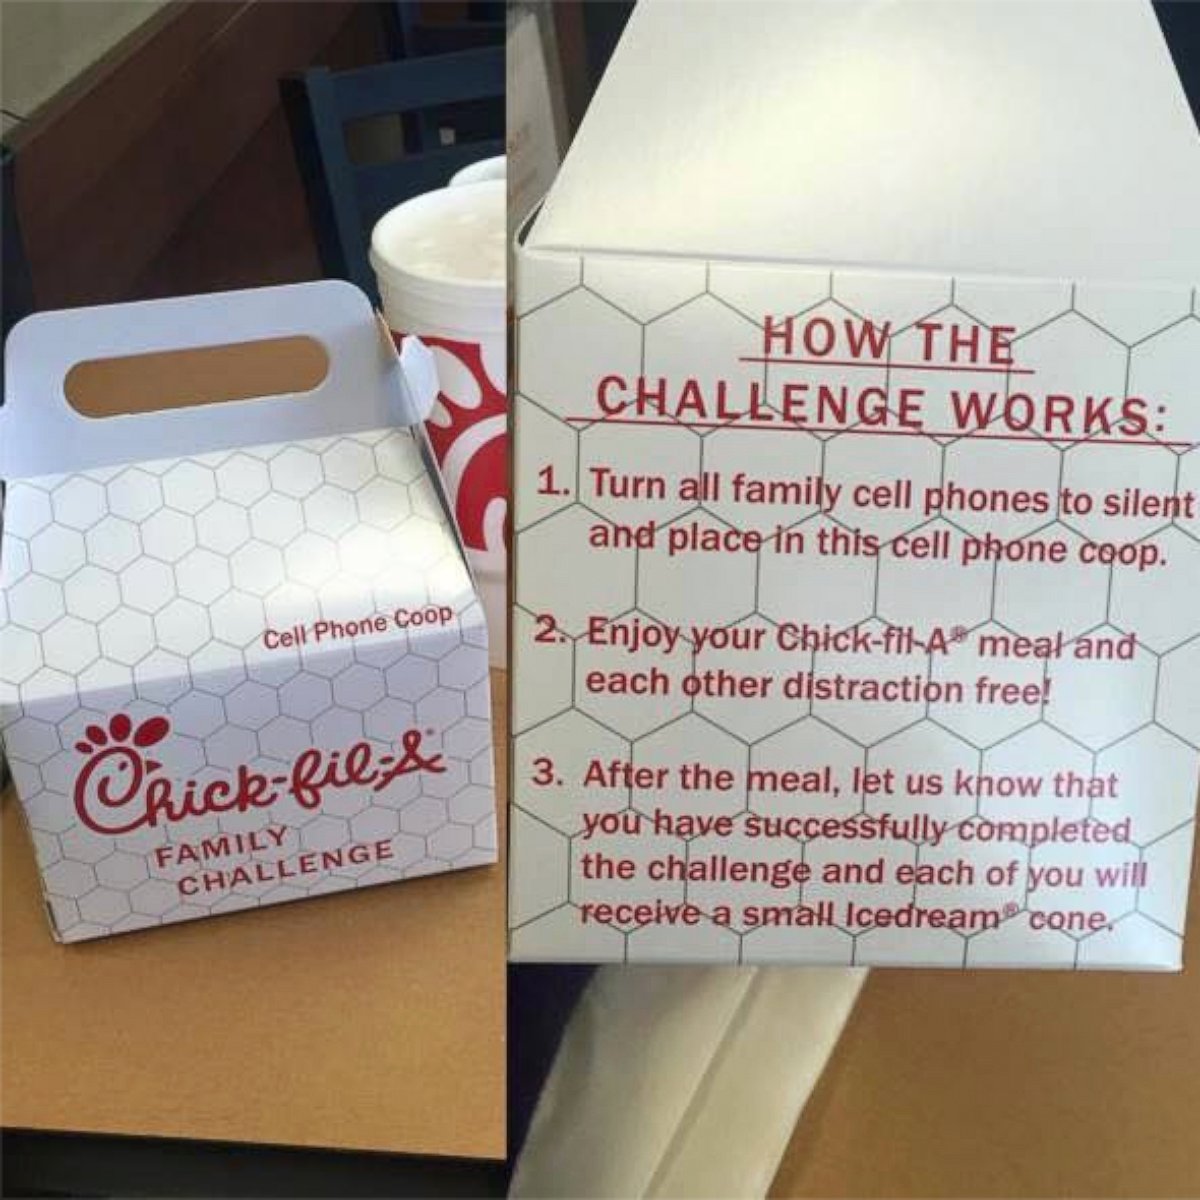 PHOTO: Some local Chick-fil-A restaurants are offering "cell phone coops" to hold their cell phones while they eat with family and friends.